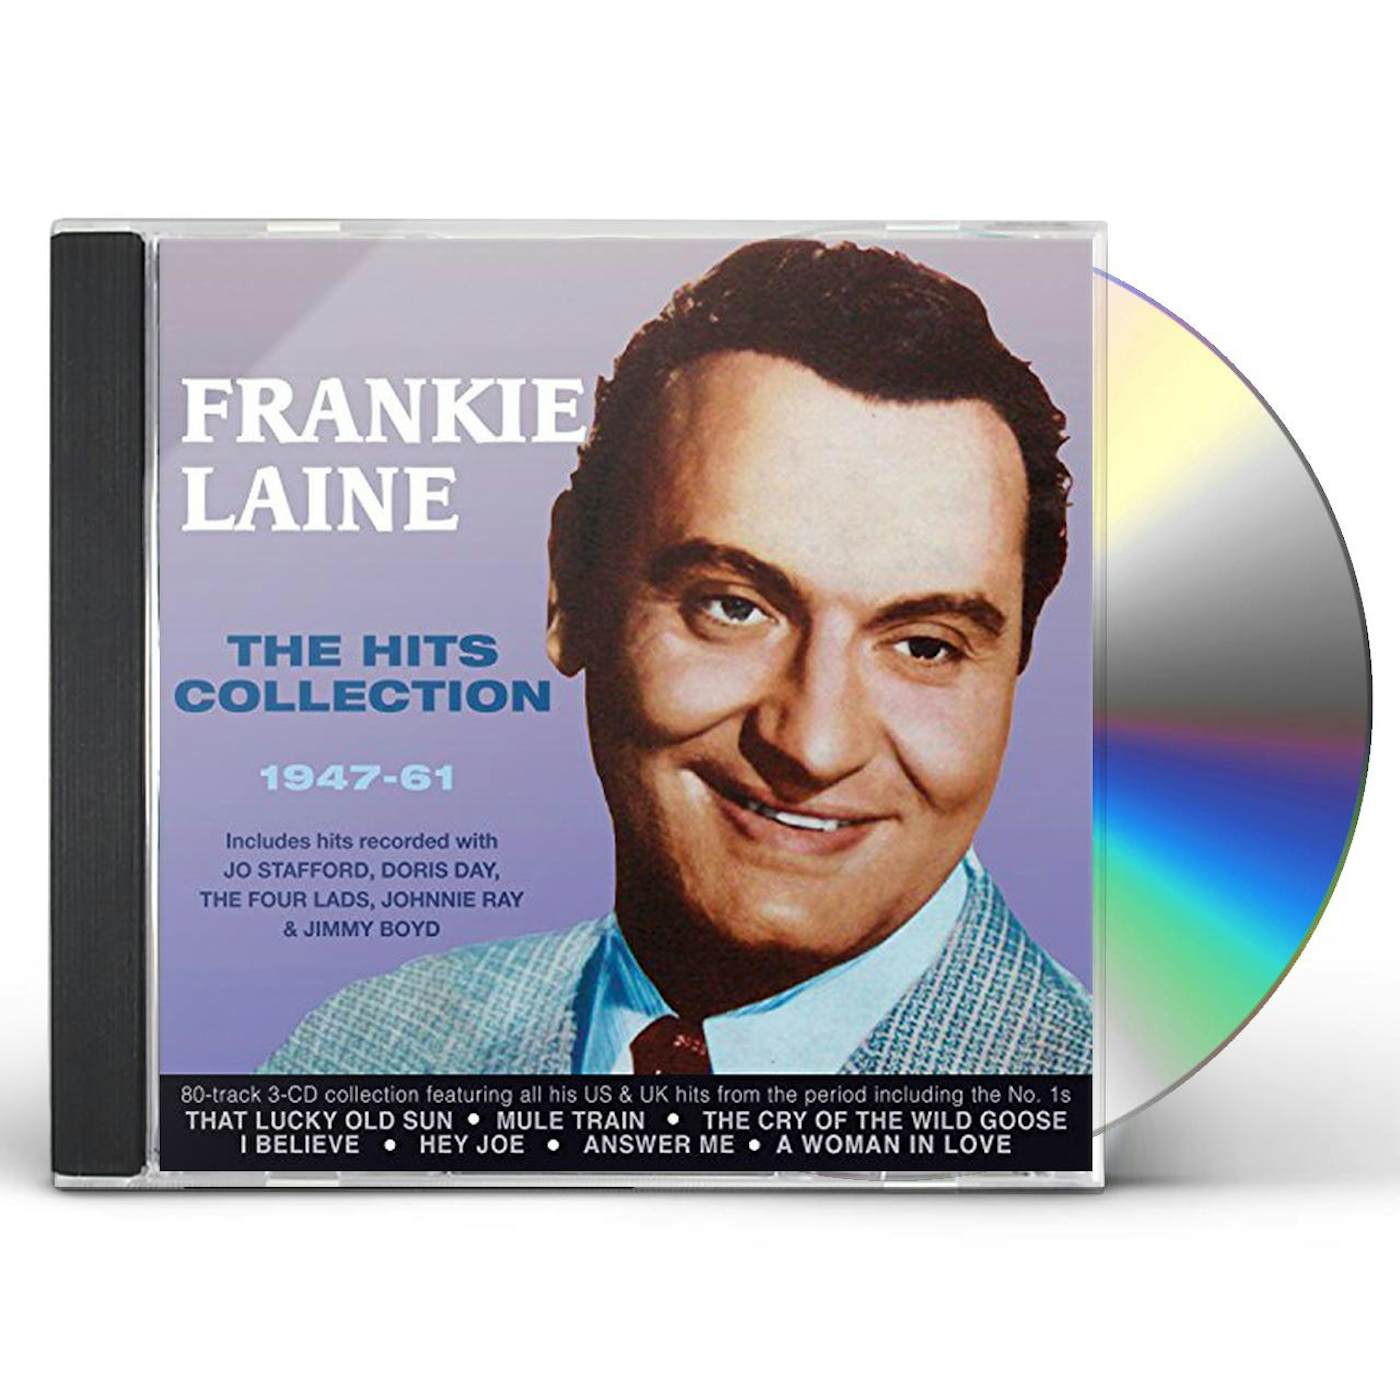 Frankie Laine HITS COLLECTION 1947-61 CD